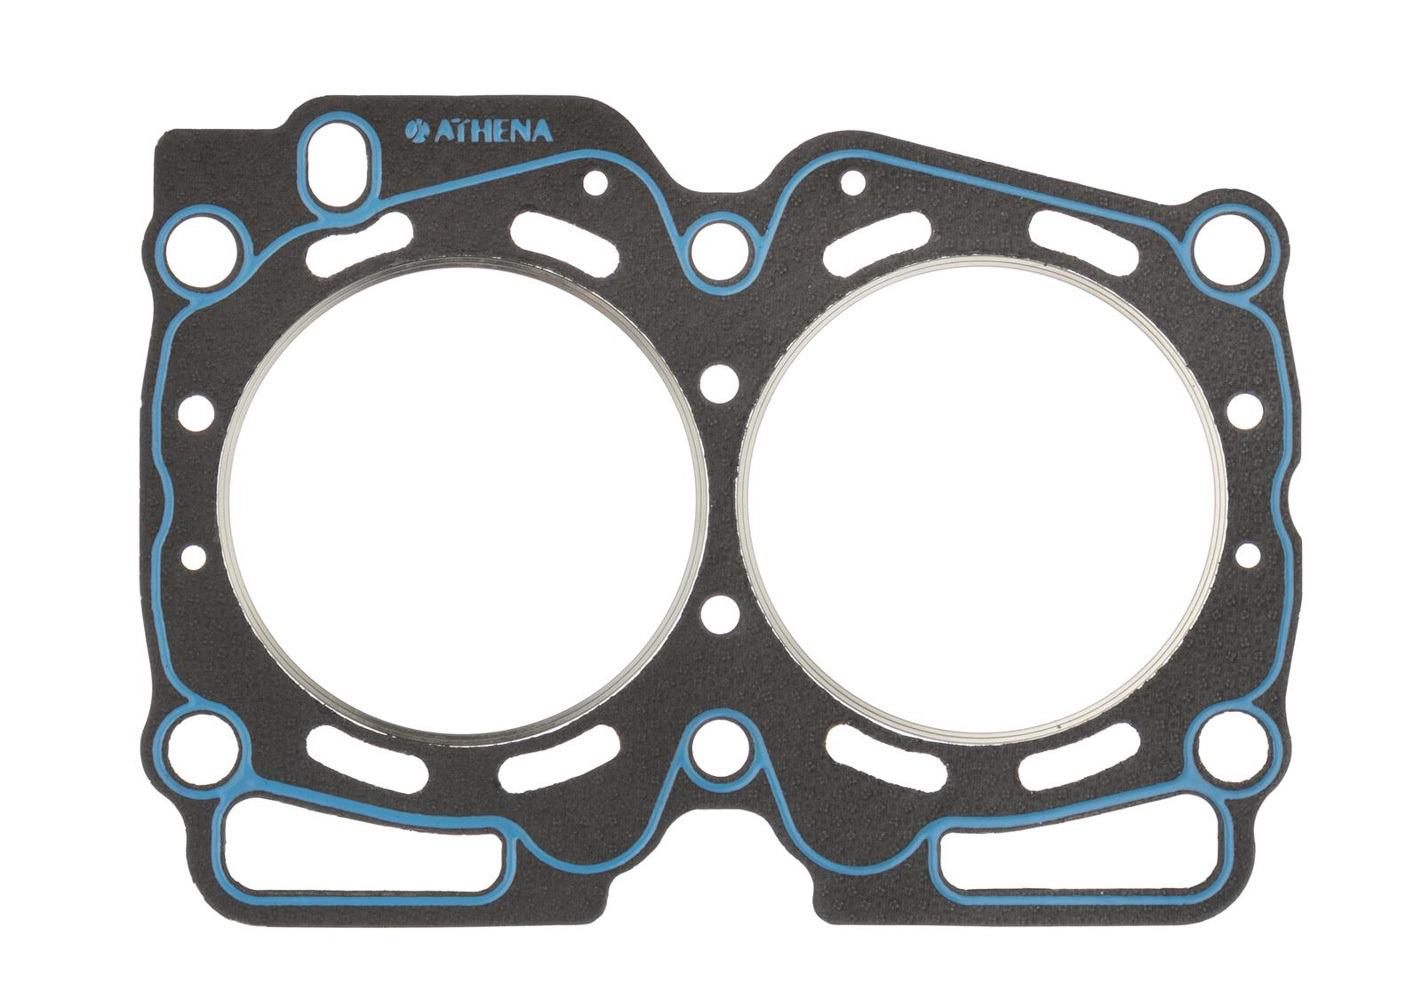 SCE Gaskets CR330066 - Cylinder Head Gasket, Vulcan Cut Ring, 101.30 mm Bore, 1.20 mm Compression Thickness, Steel Core Laminate, Subaru 4-Cylinder, Each